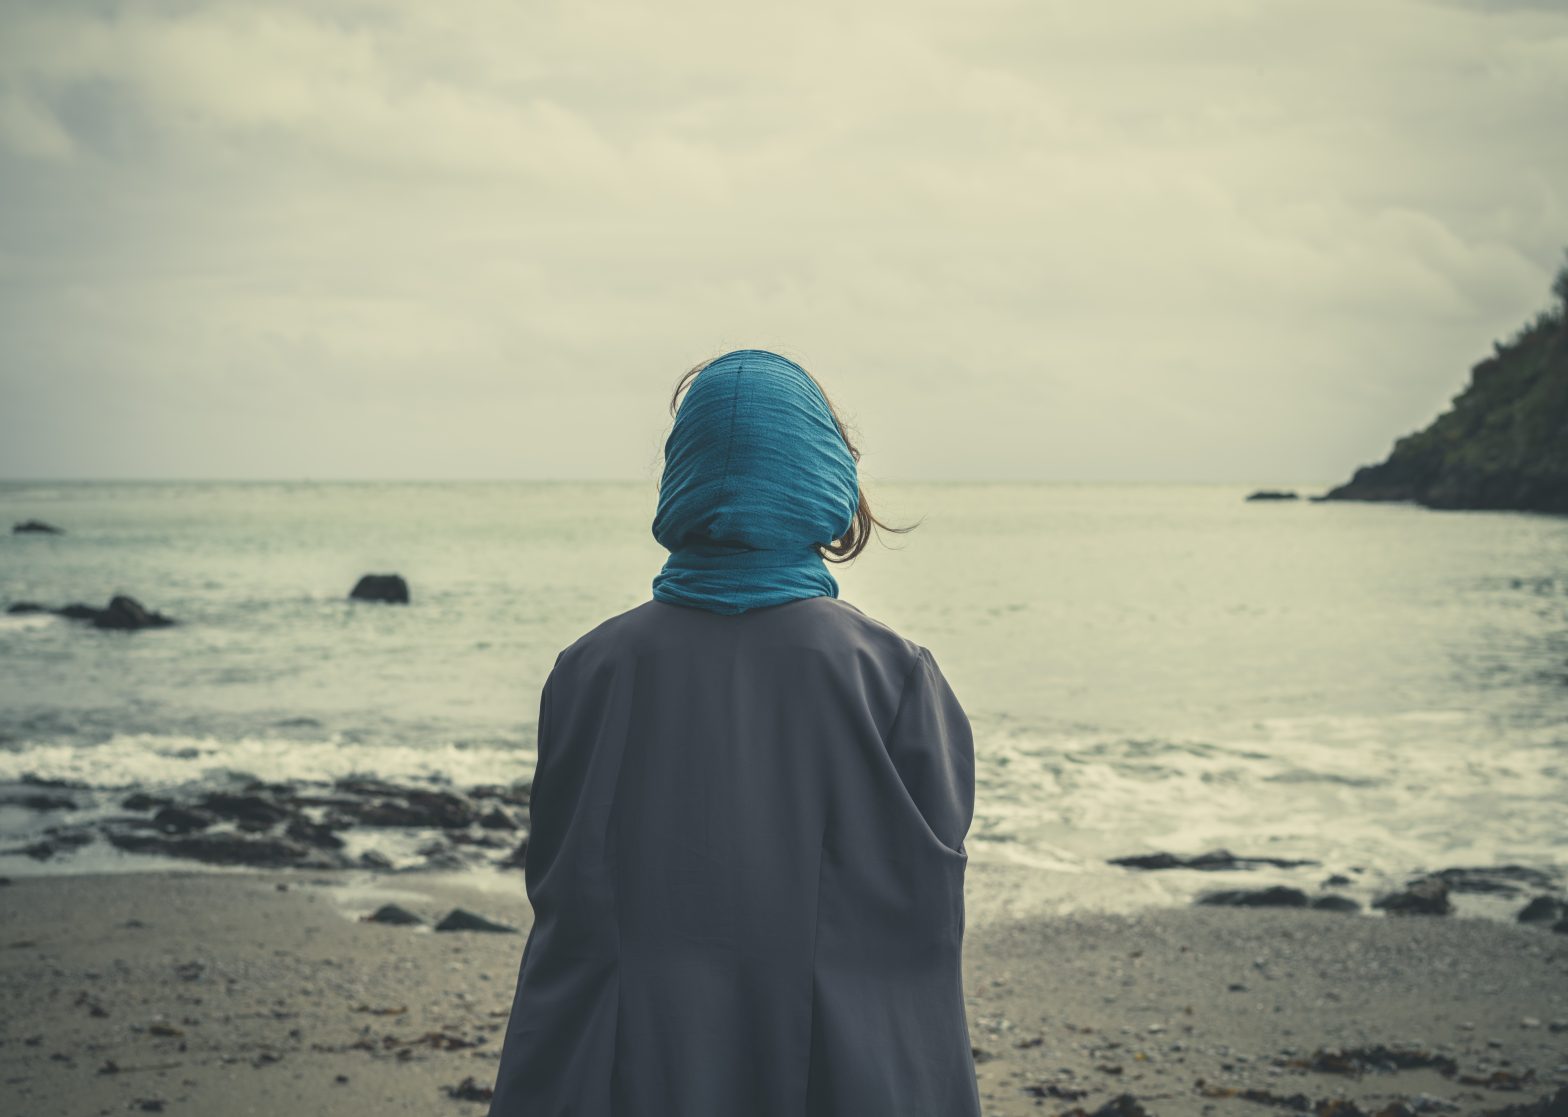 A young woman swearing a headscarf is standing on the beach and is looking out to sea on a windy and cold day